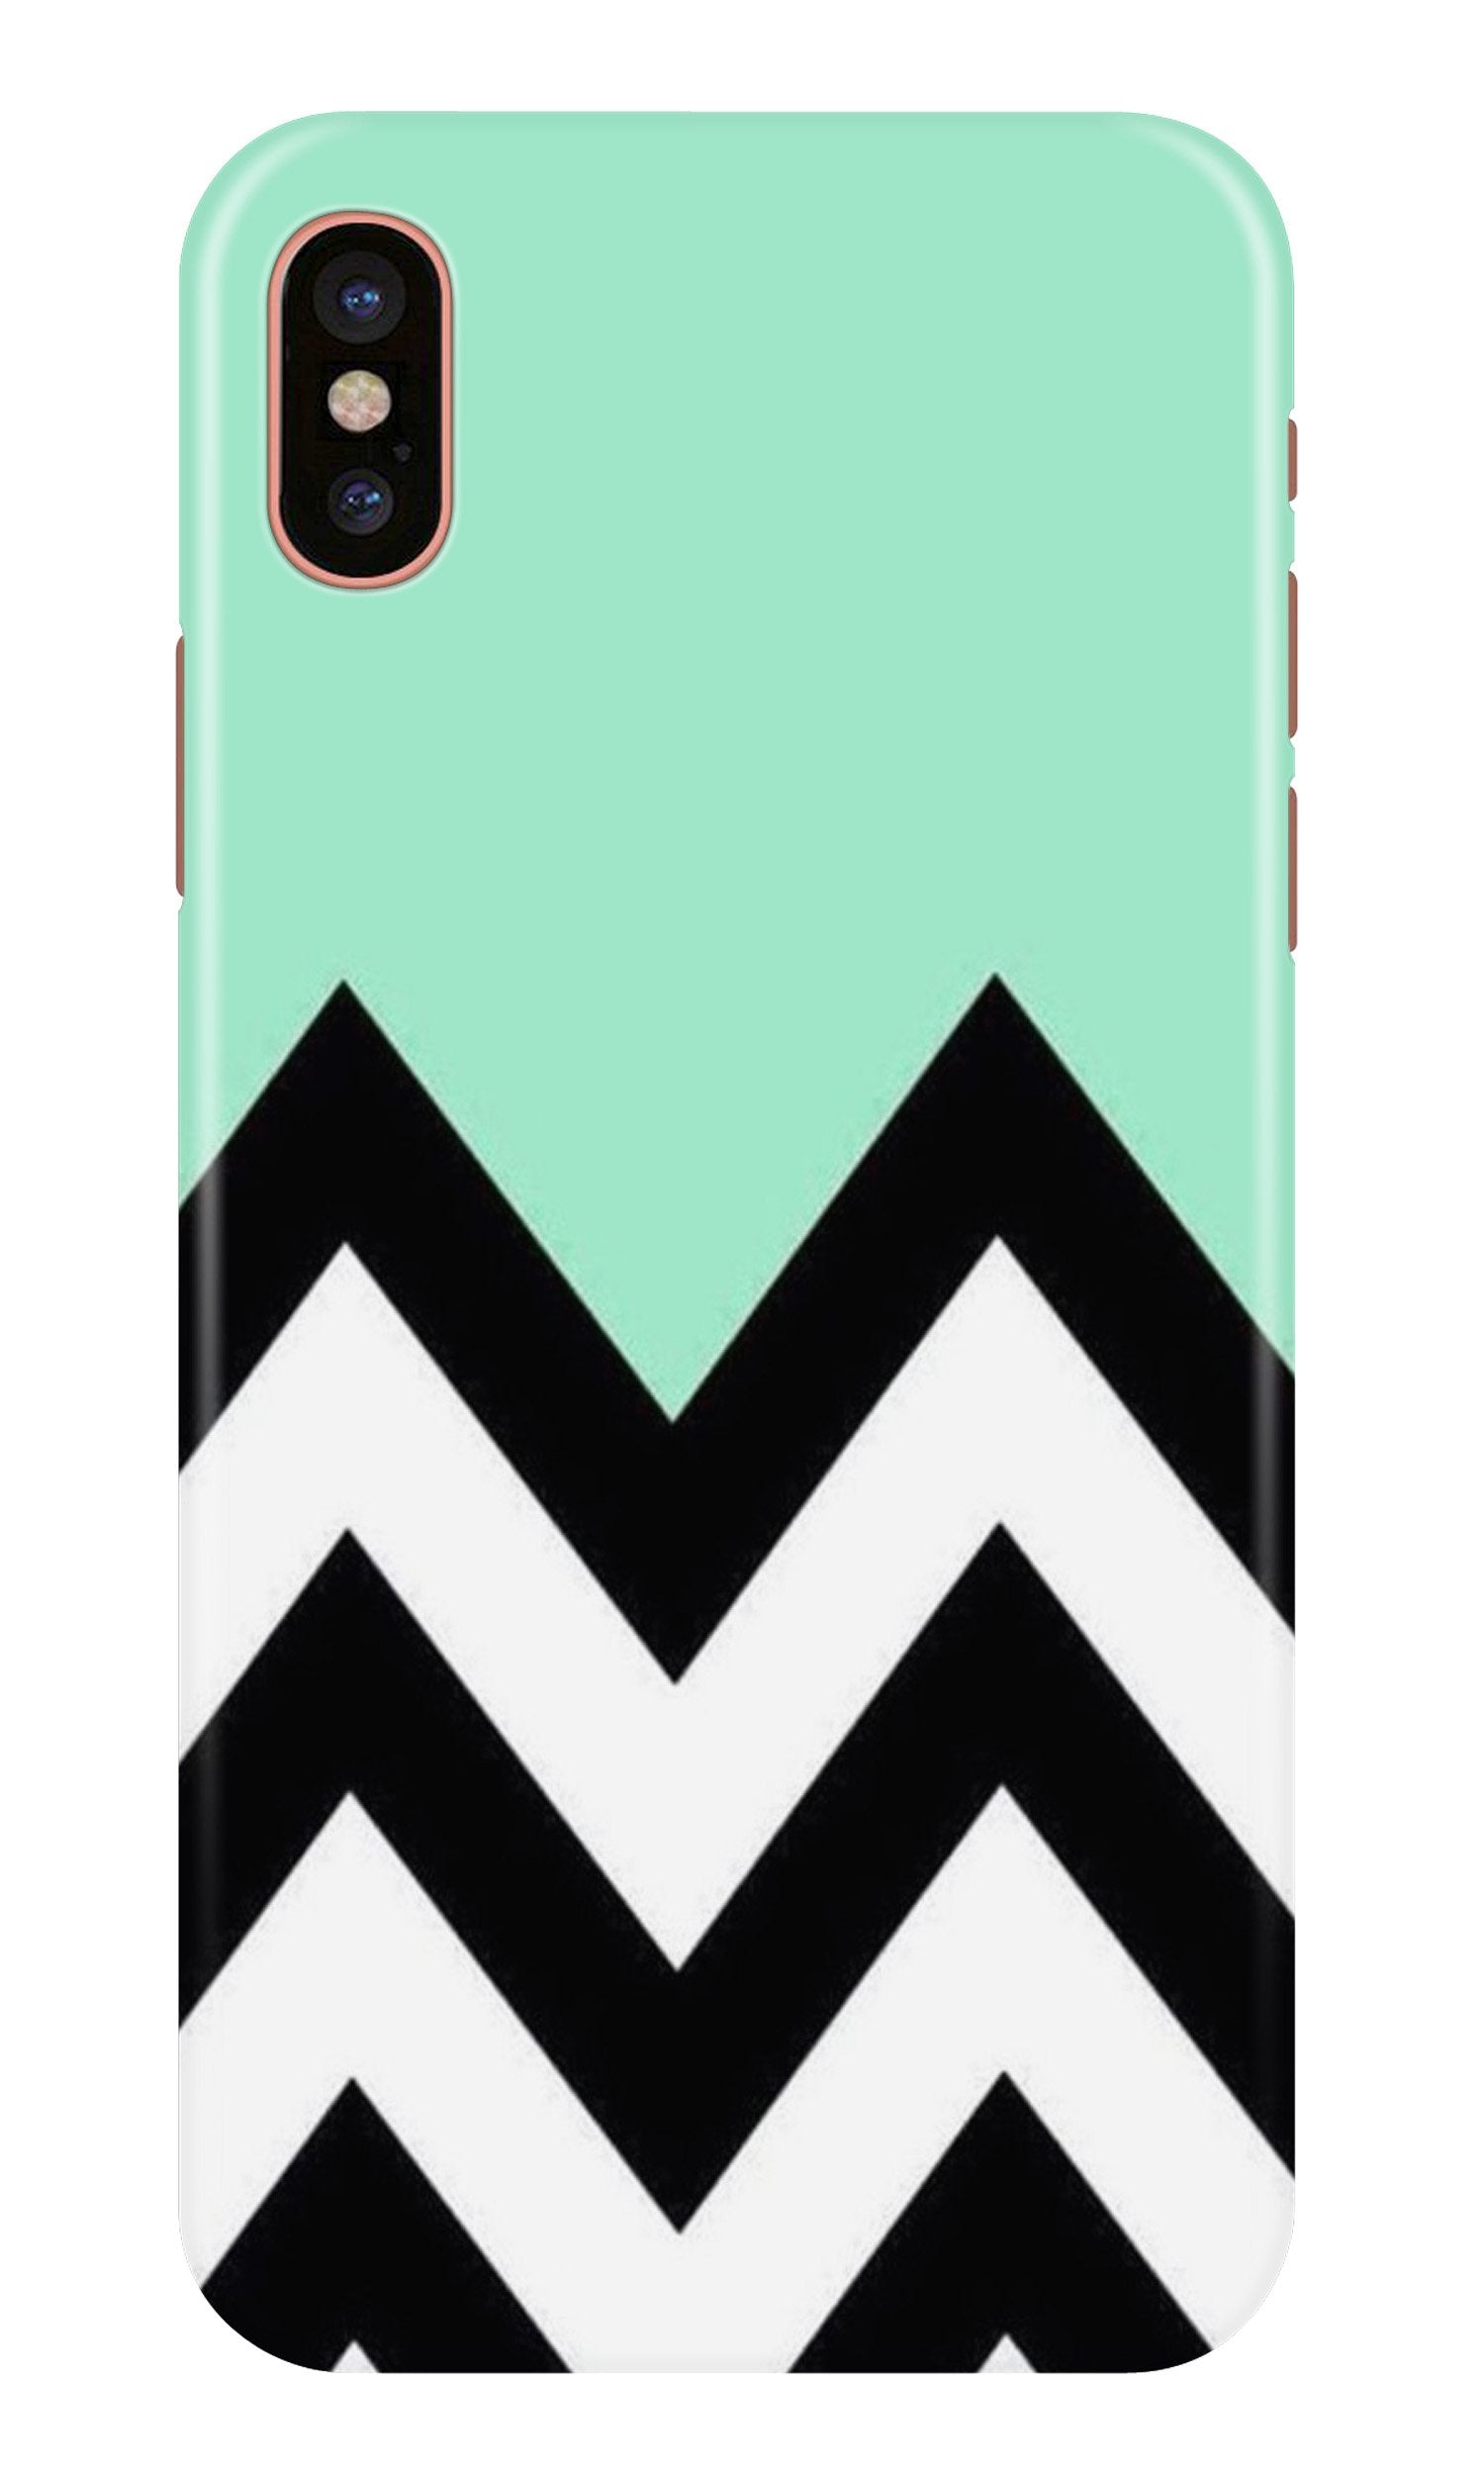 Pattern Case for iPhone X